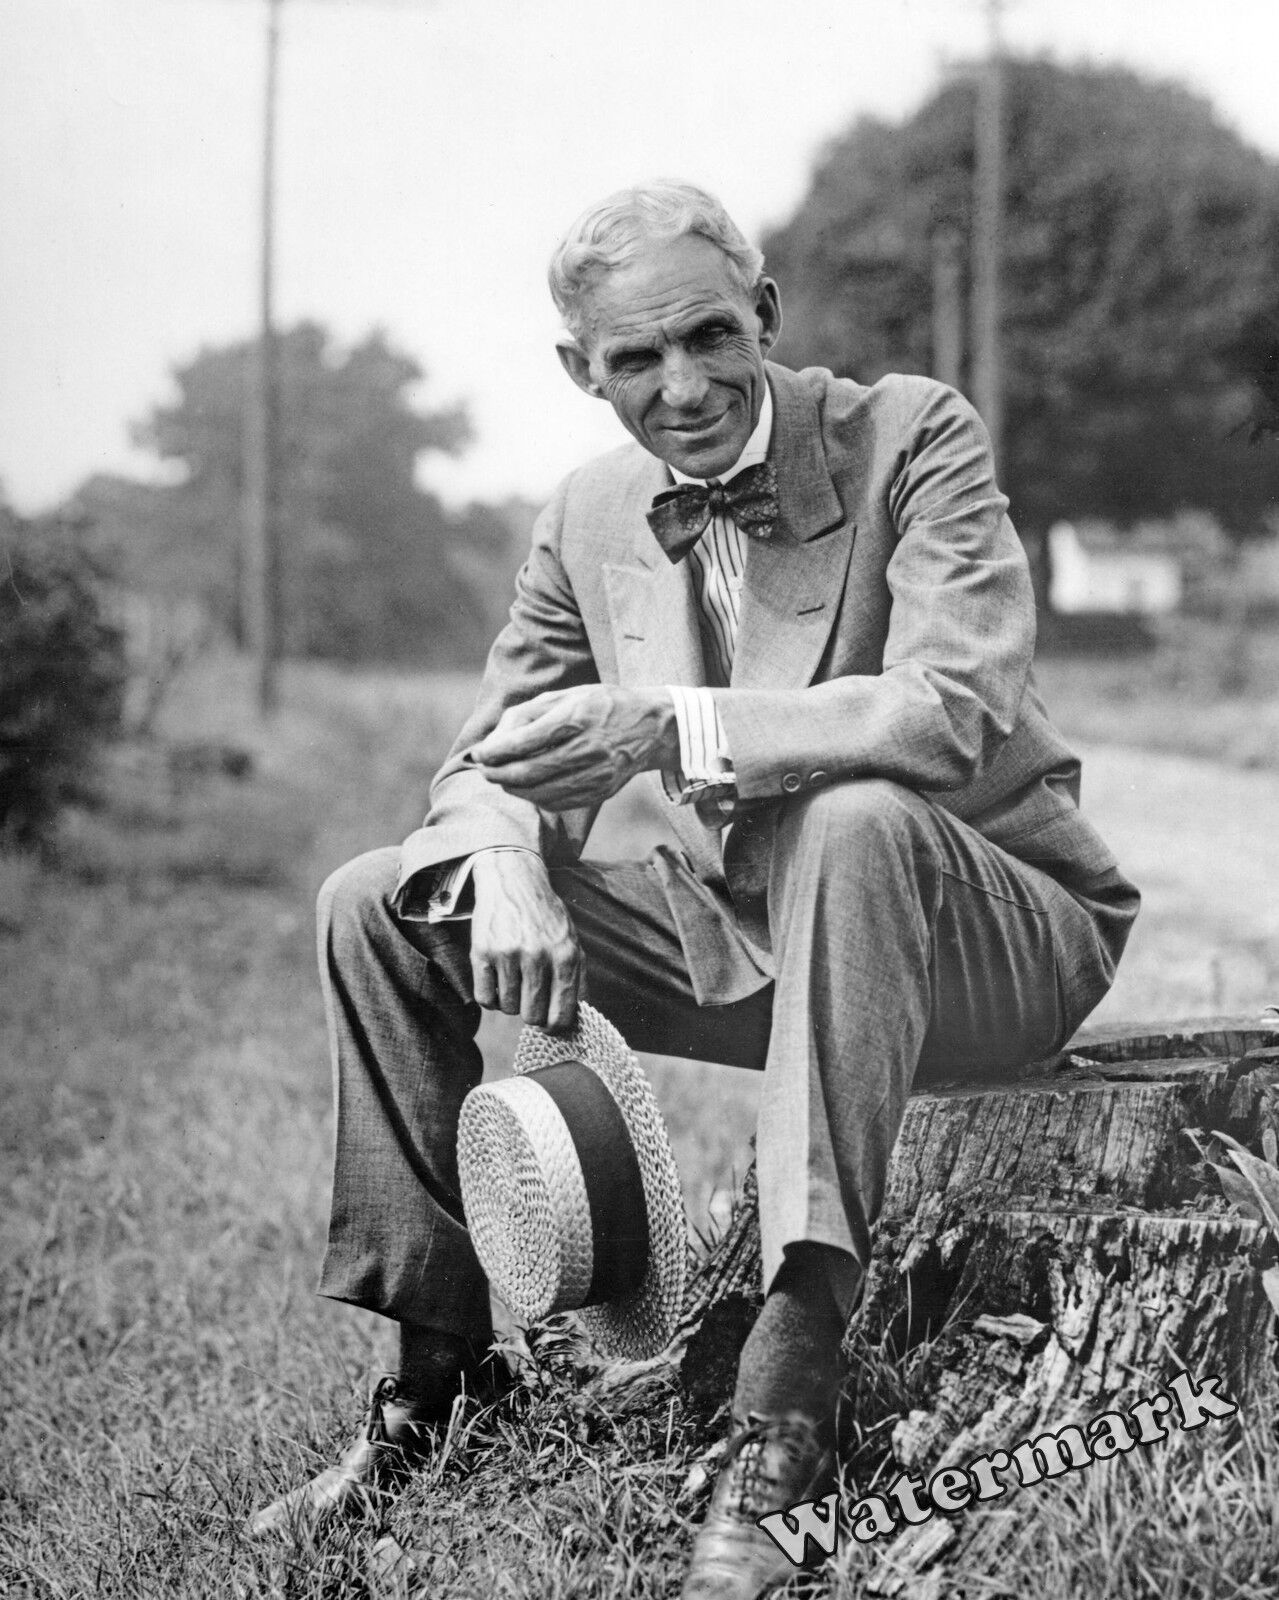 Photograph of Automobile Inventor Henry Ford   8x10